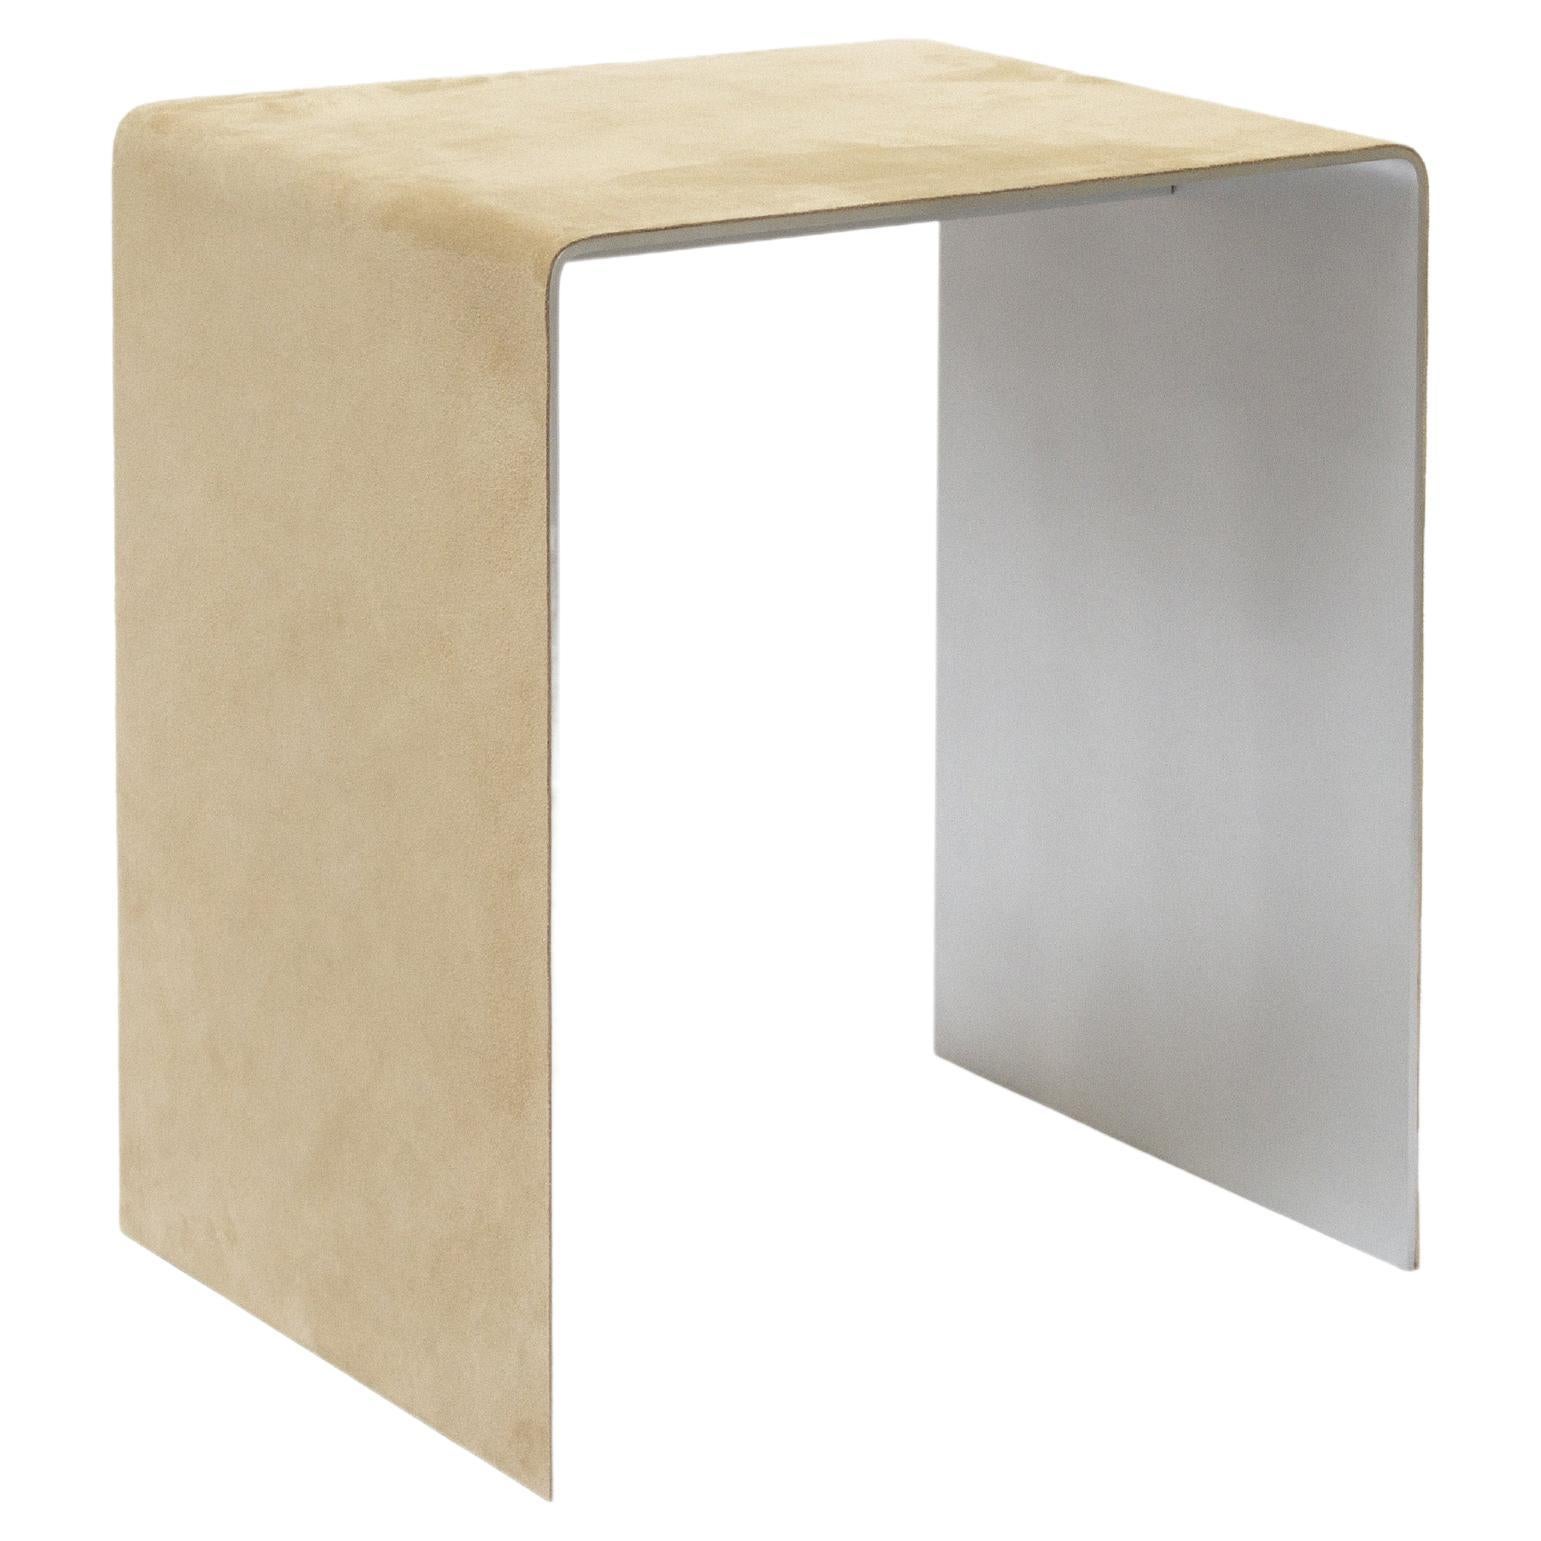 SEGMENT Stool in Aluminum and Suede by Estudio Persona For Sale